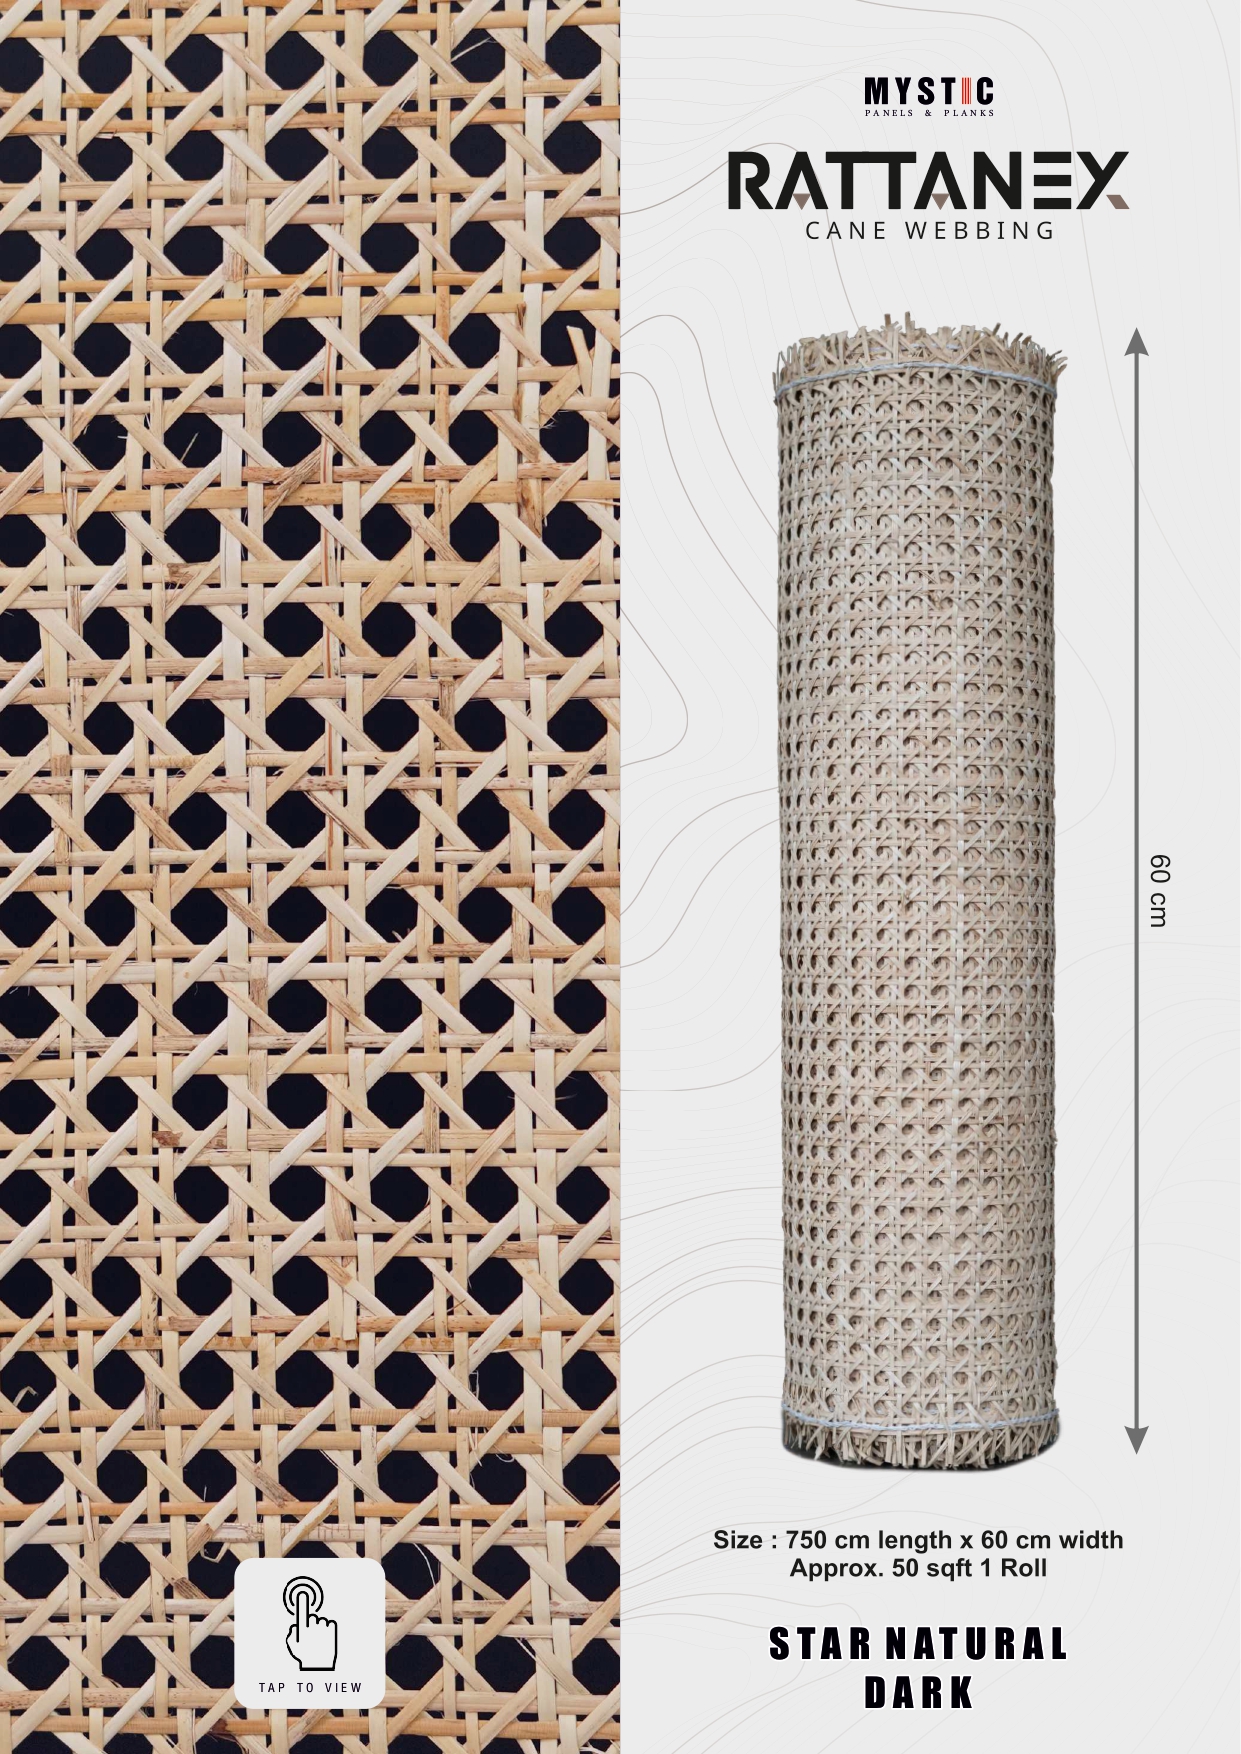 23 Rattan Cane Wall Paneling - Premium Quality Handcrafted Design"